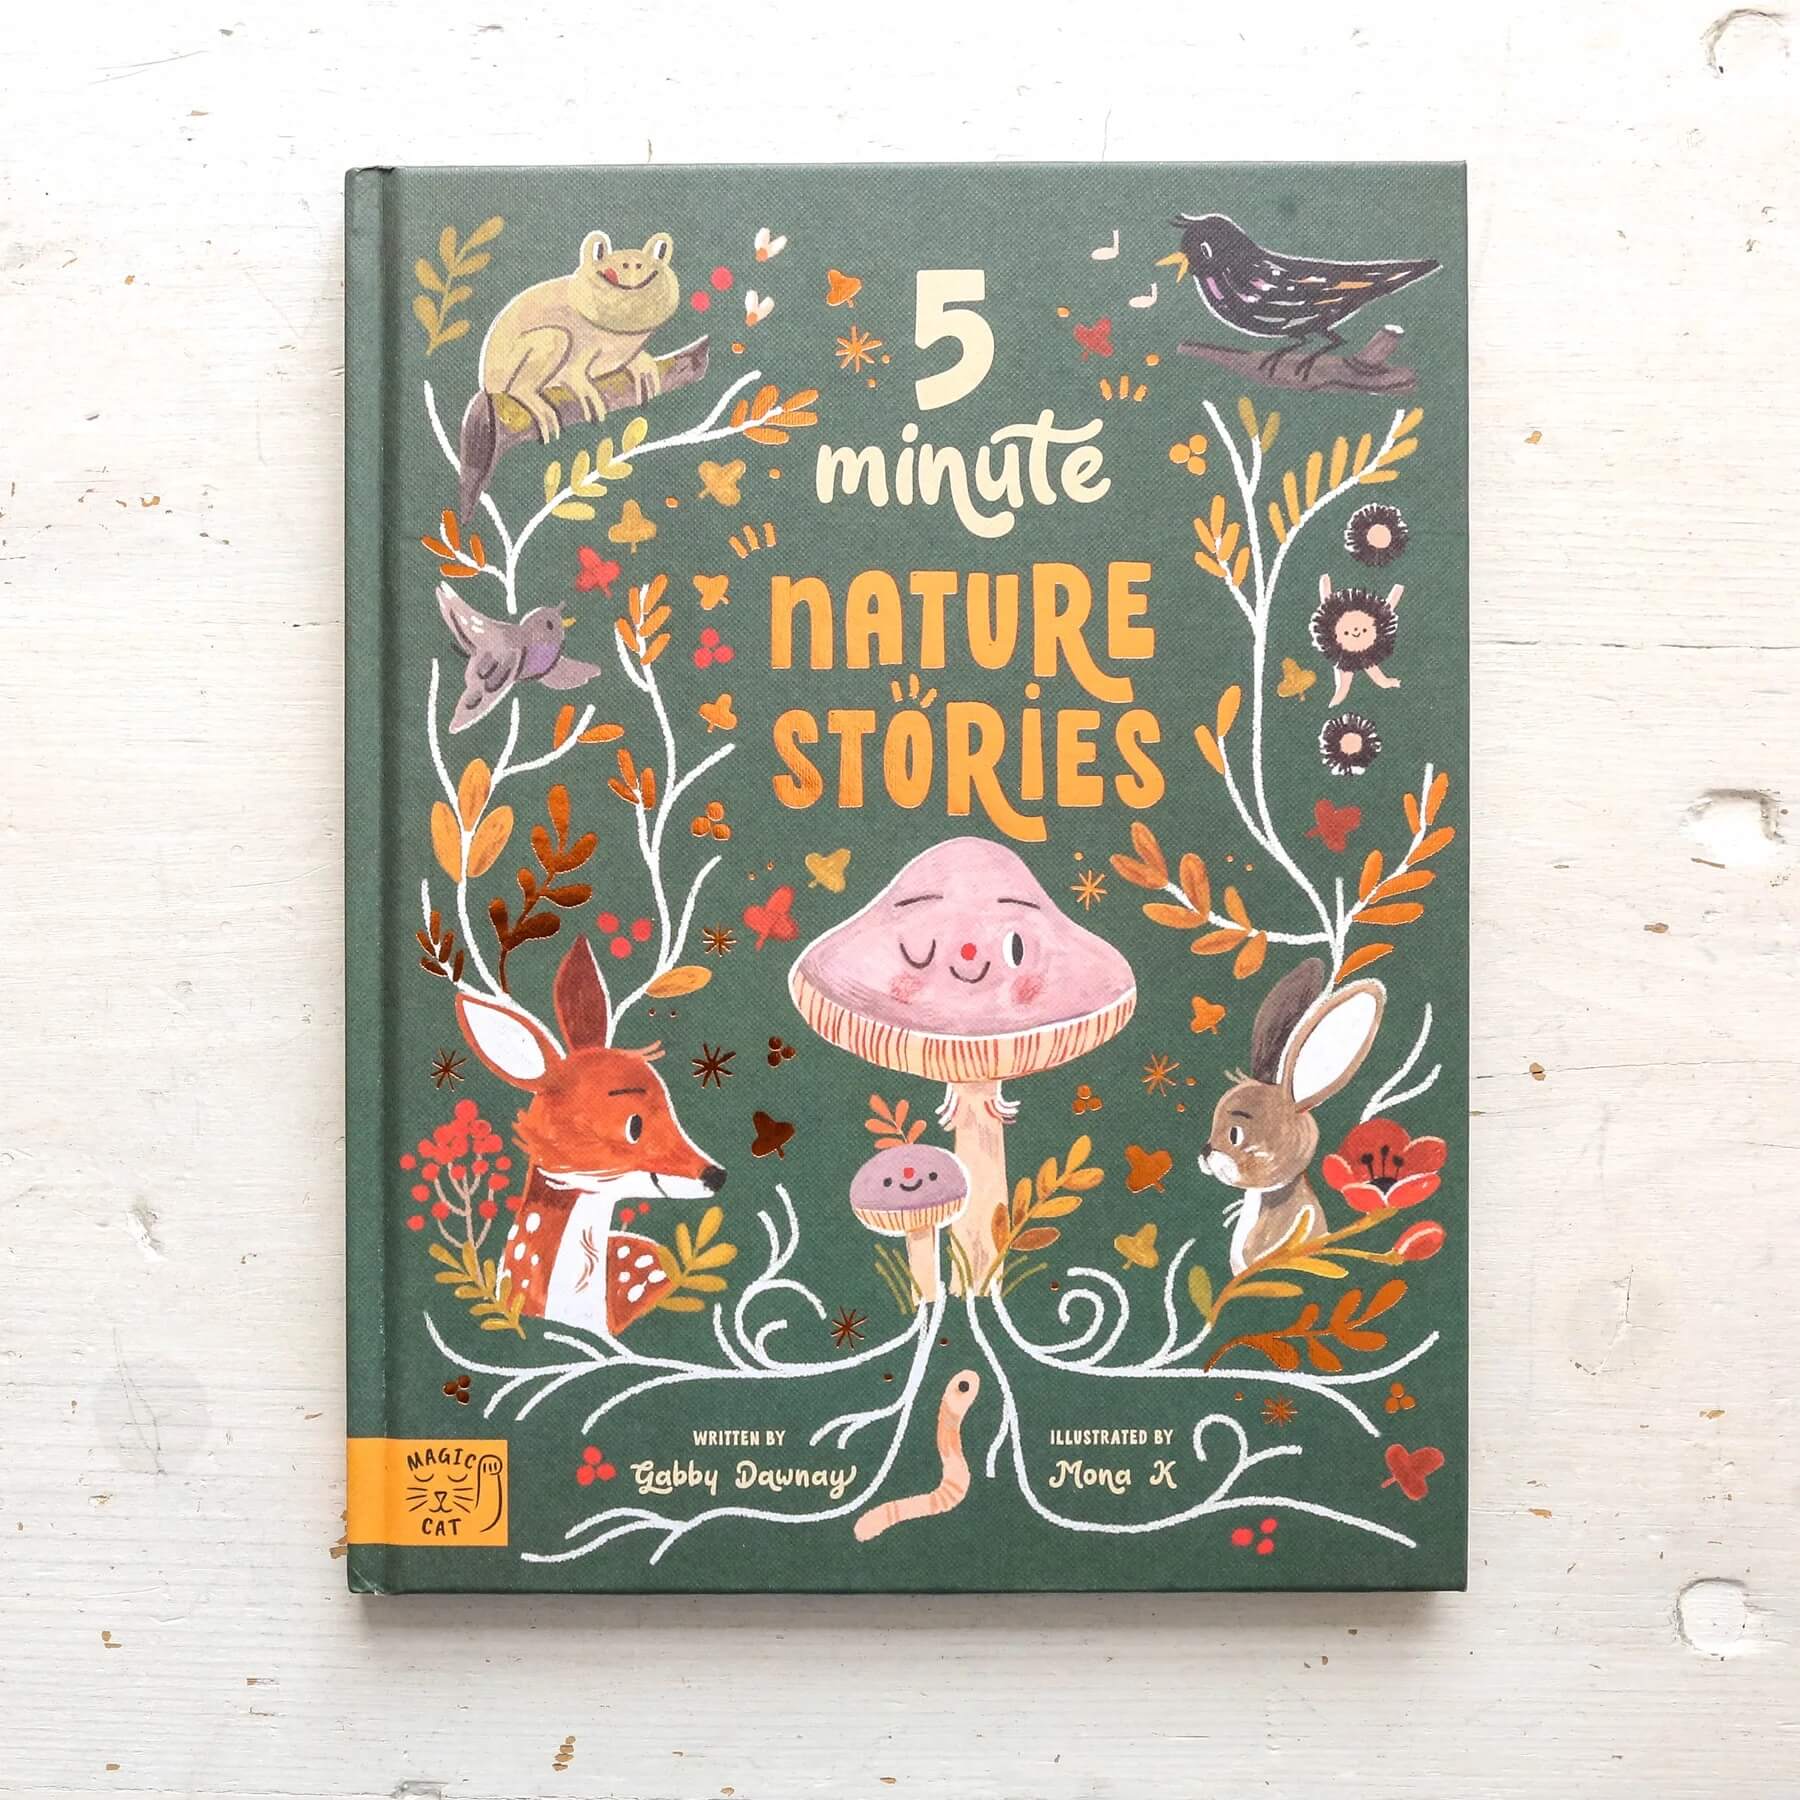 91 Magazine independent Christmas Gift Guide - Nature Stories book from Berylune